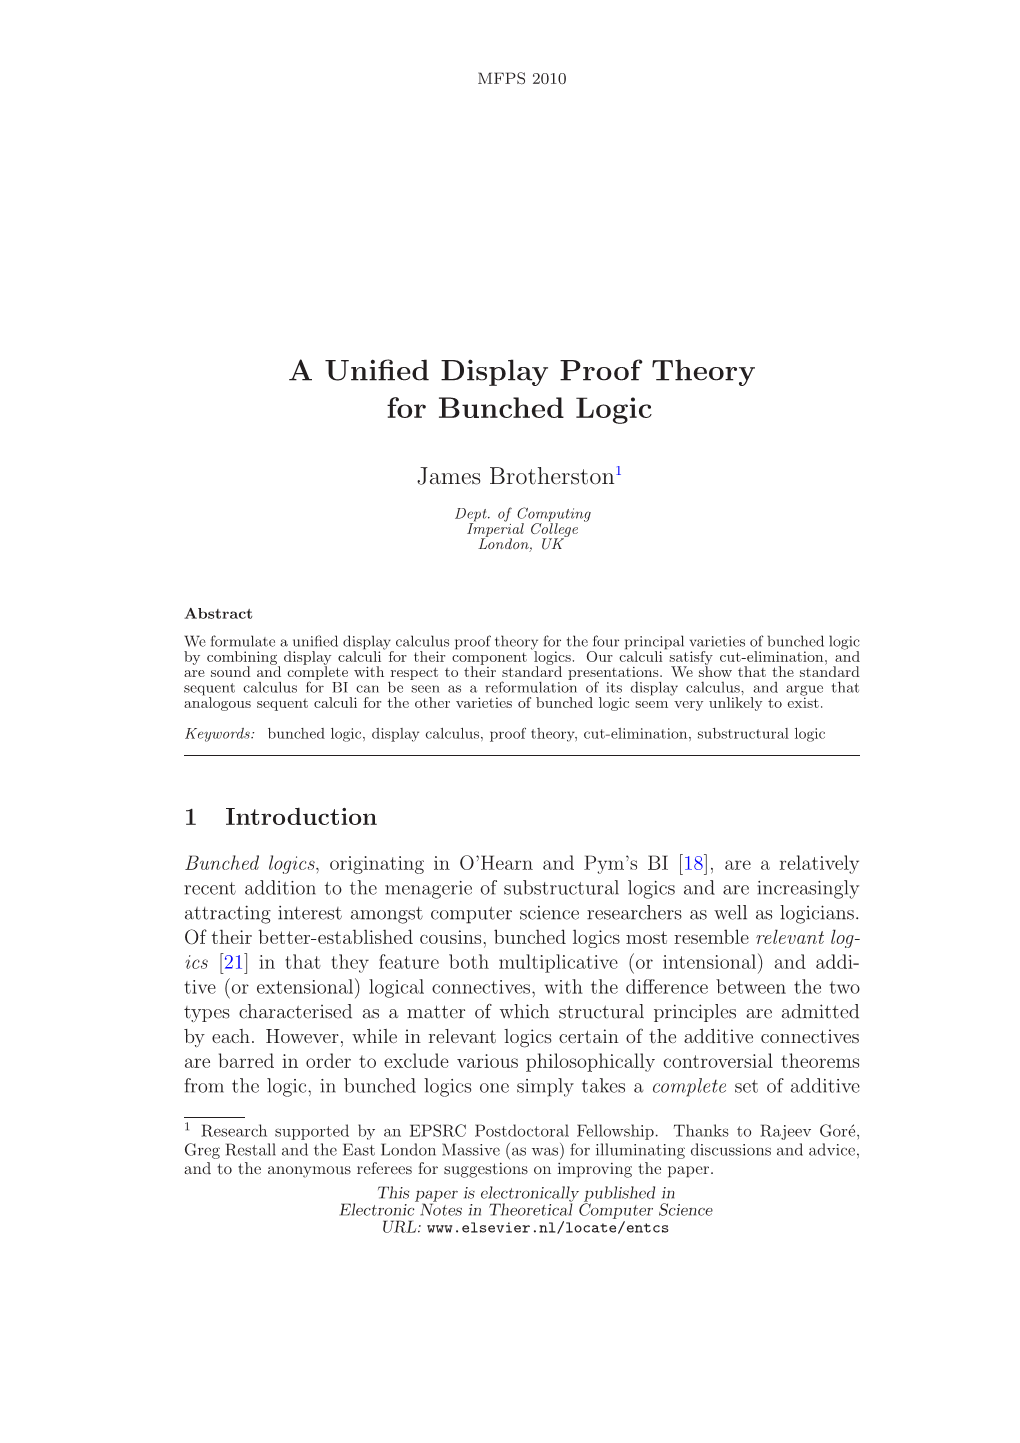 A Unified Display Proof Theory for Bunched Logic